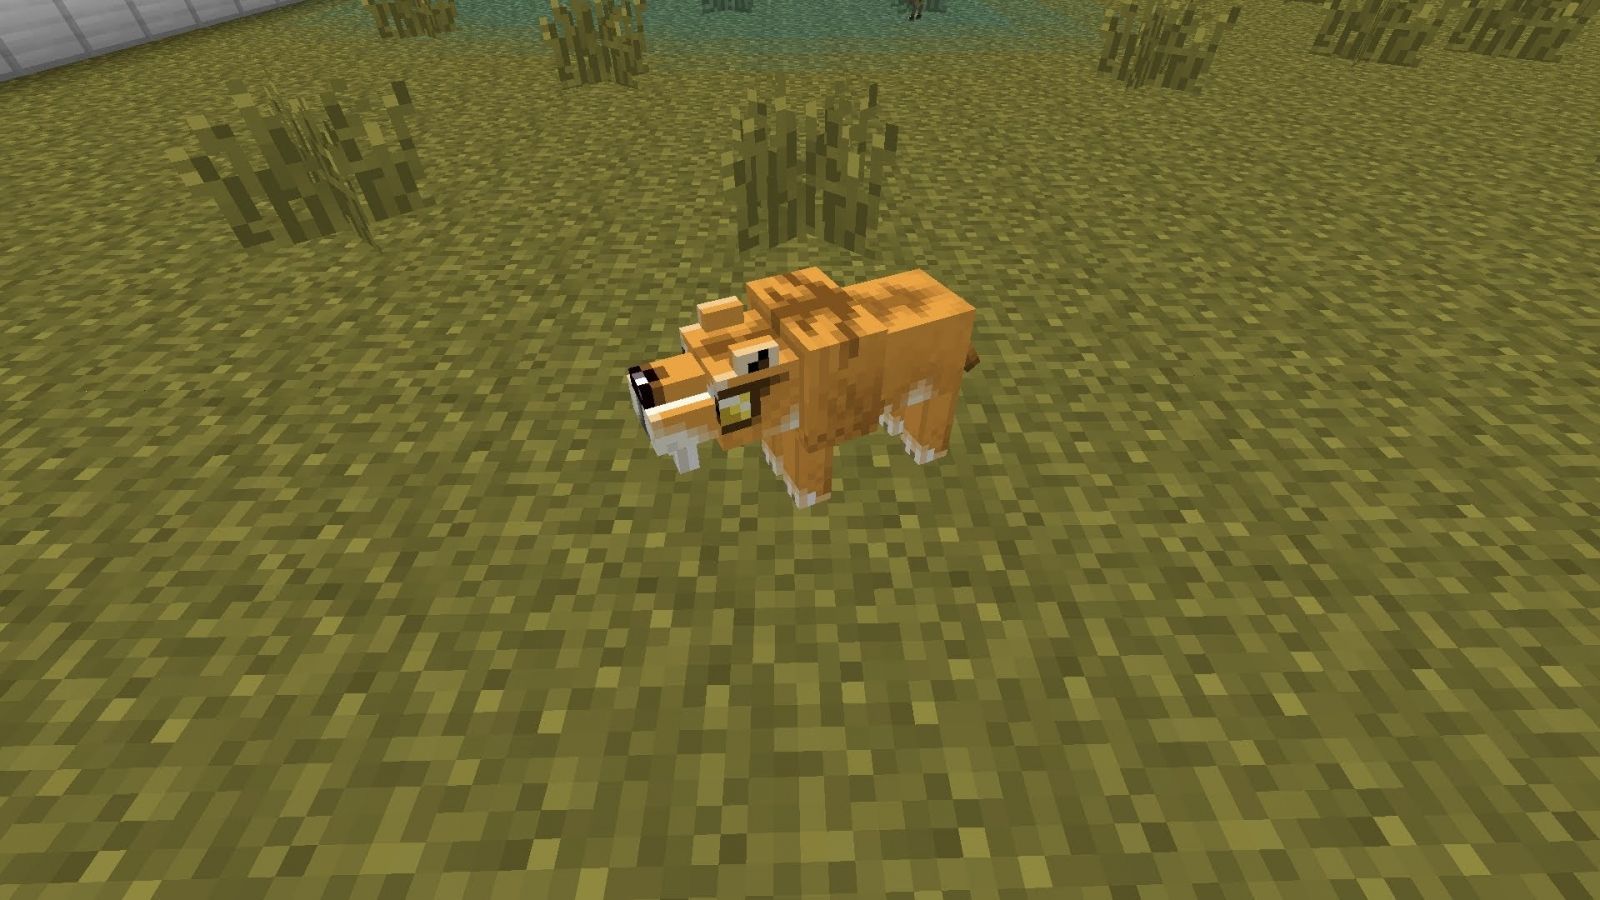 Free download 1920x1080px Minecraft Cat Wallpaper [1920x1080] for your Desktop, Mobile & Tablet. Explore Minecraft Cats Wallpaper. Minecraft Cats Wallpaper, Cats Wallpaper, Wallpaper Cats